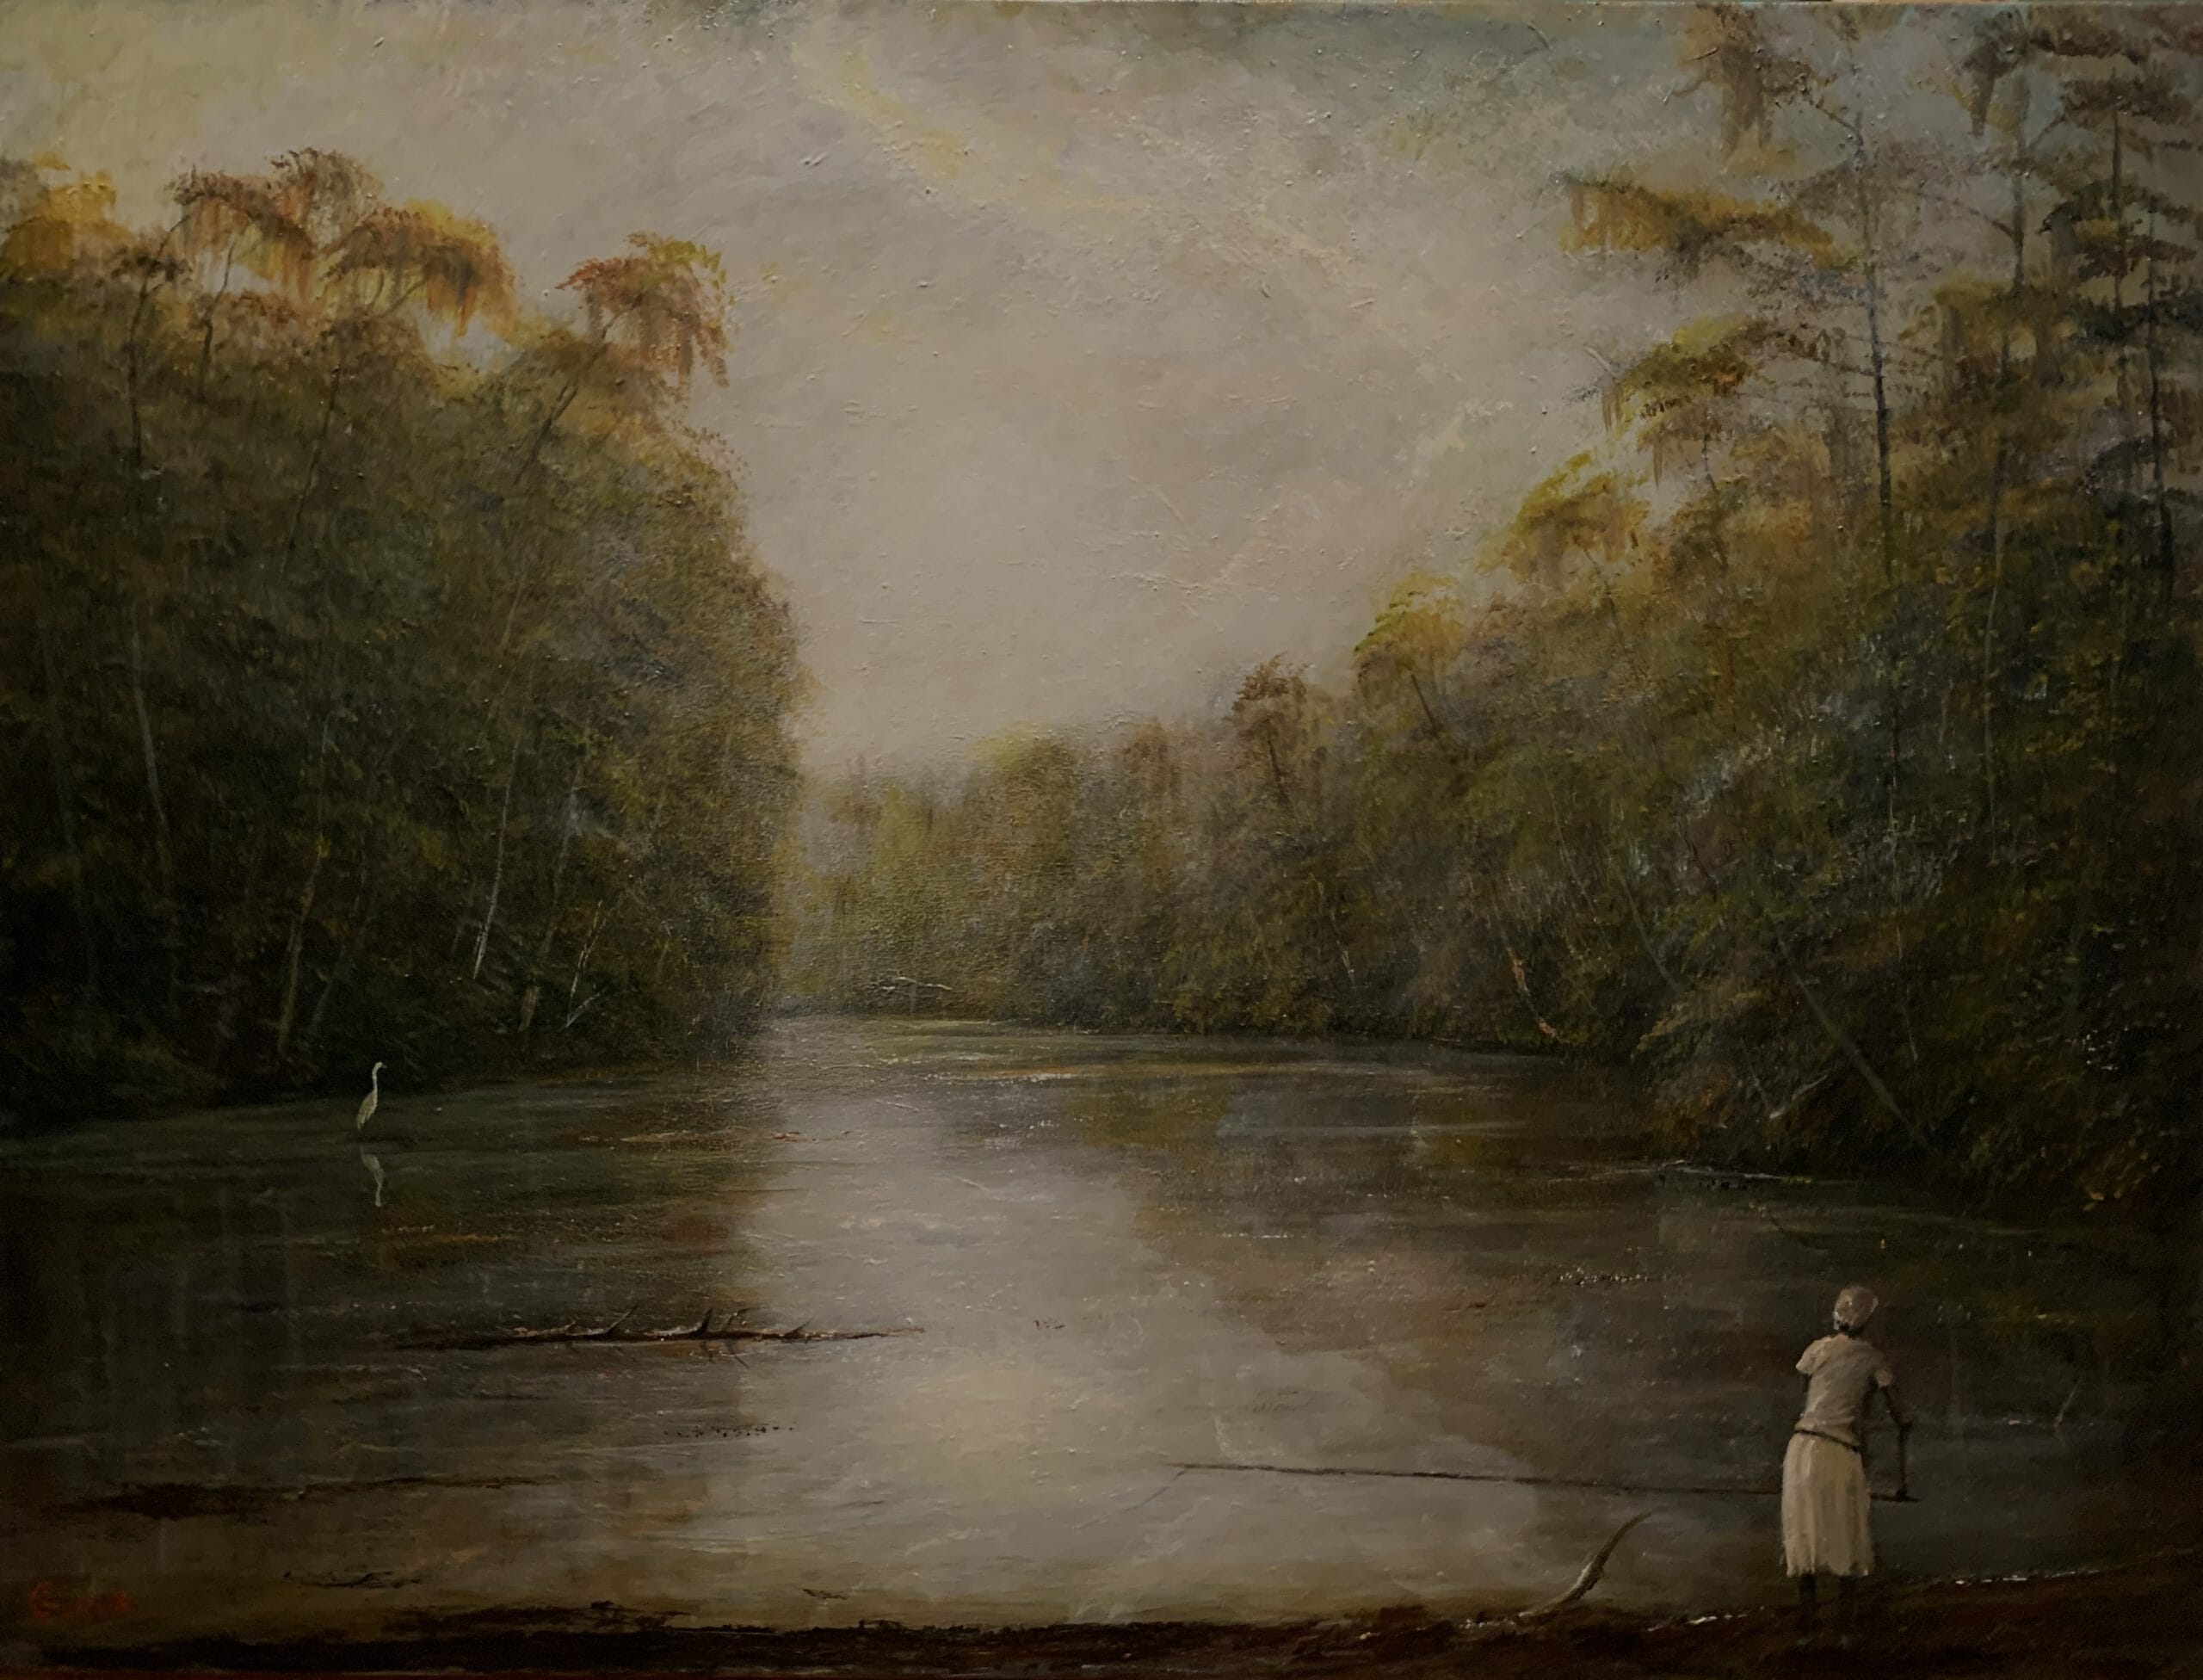 “On the River,” the beautiful Ochlockonee River depicted by artist Dean Gioia